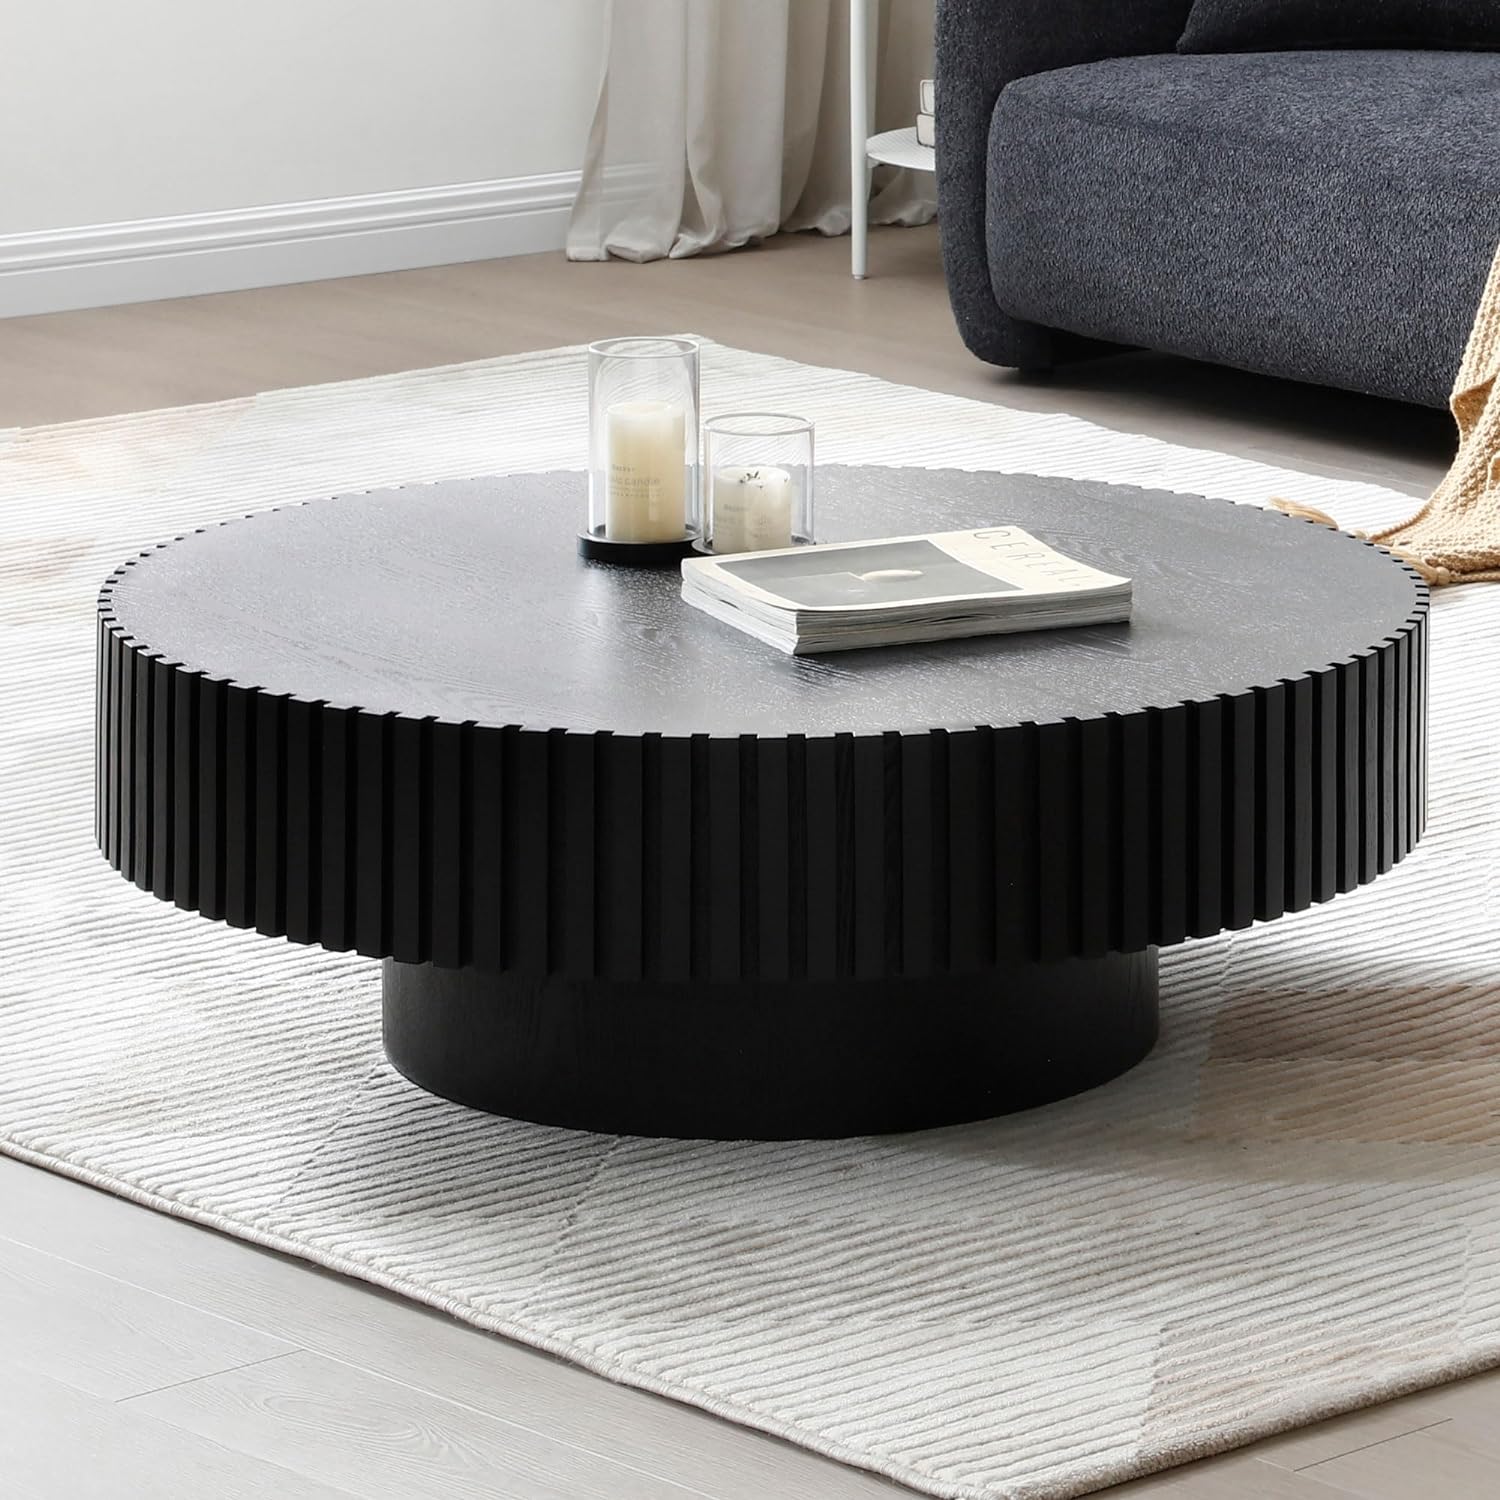 WILLIAMSPACE 31.49 Black Round Coffee Table, Modern Luxury Wood Circle Drum Center Table for Living Room, Accent Side Table End Table for Apartment, 31.49'' x 13.77''H (Black)